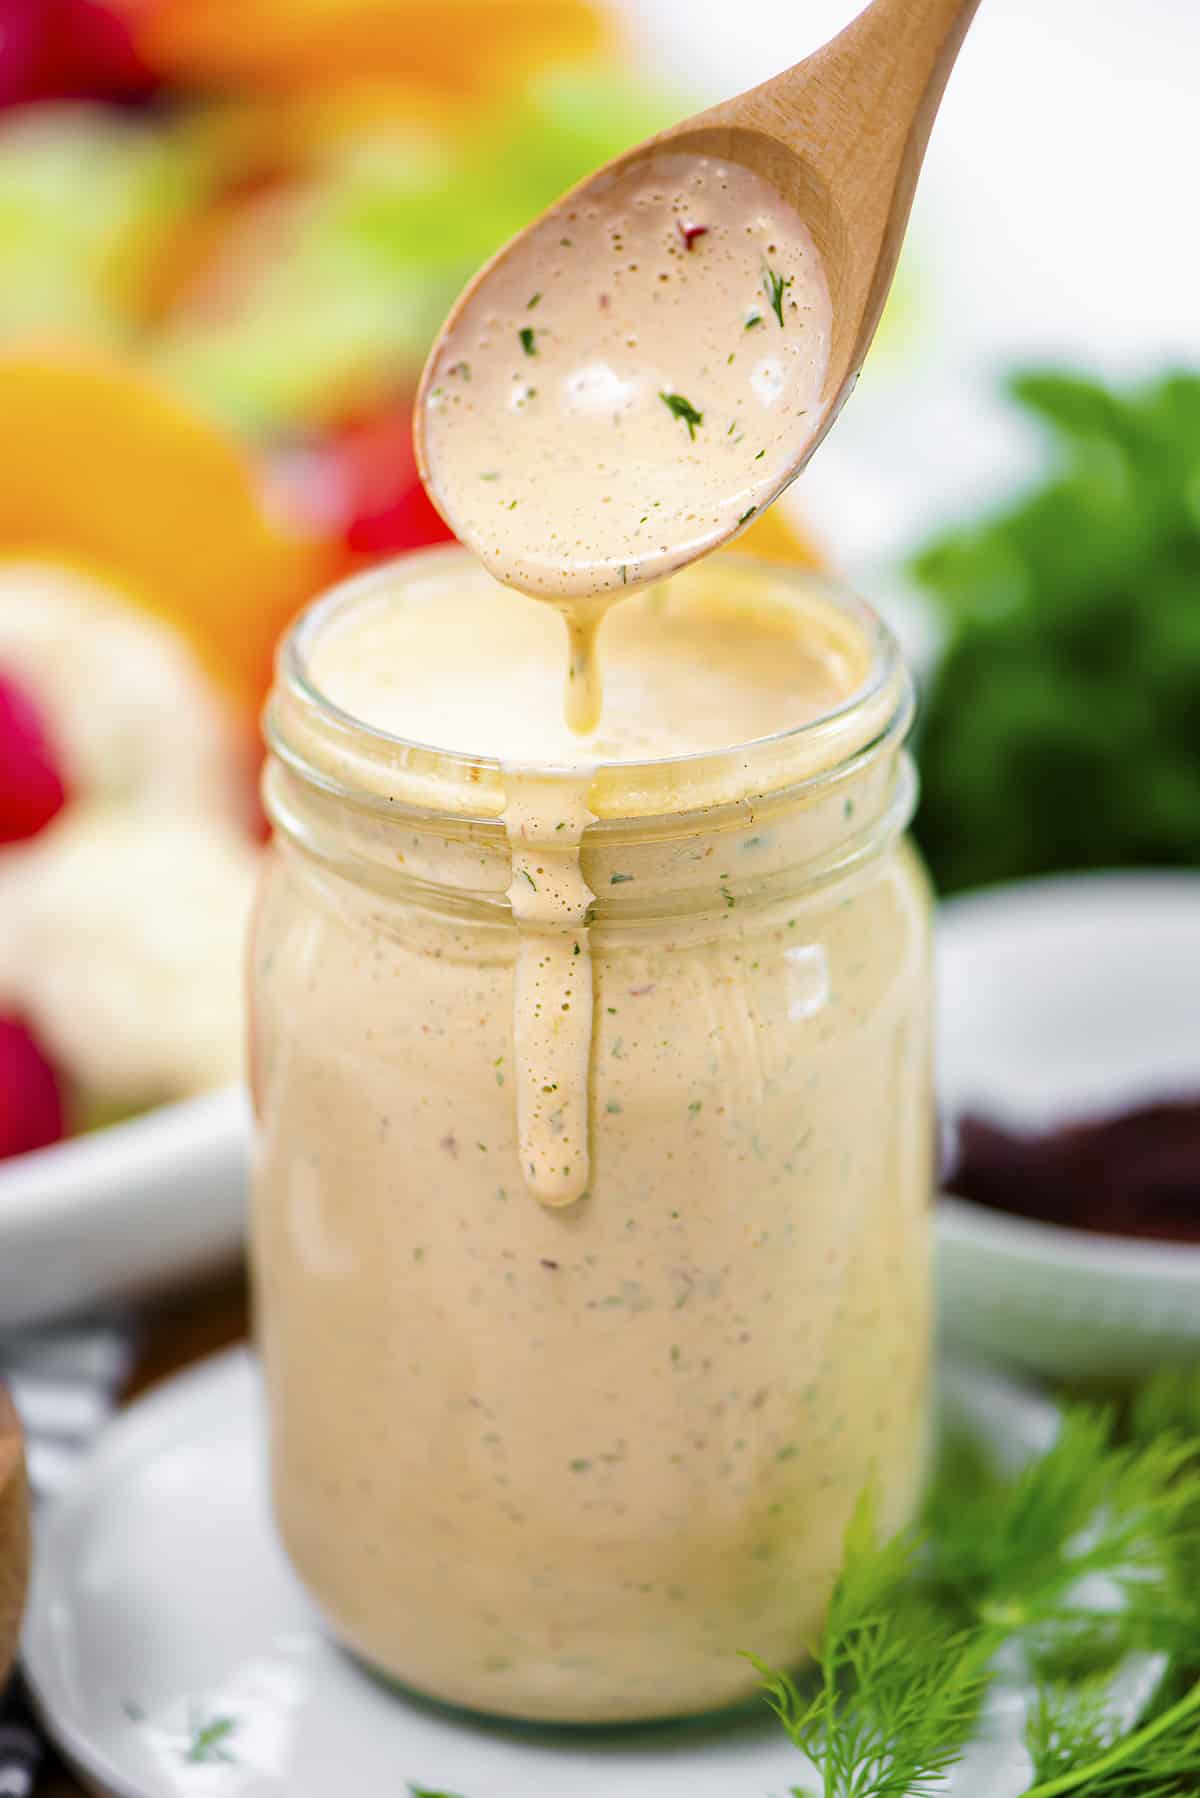 Spoonful of chipotle ranch dressing over jar.